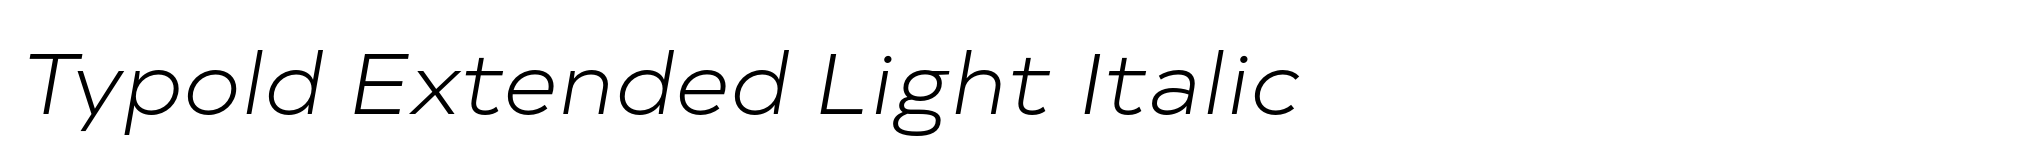 Typold Extended Light Italic image